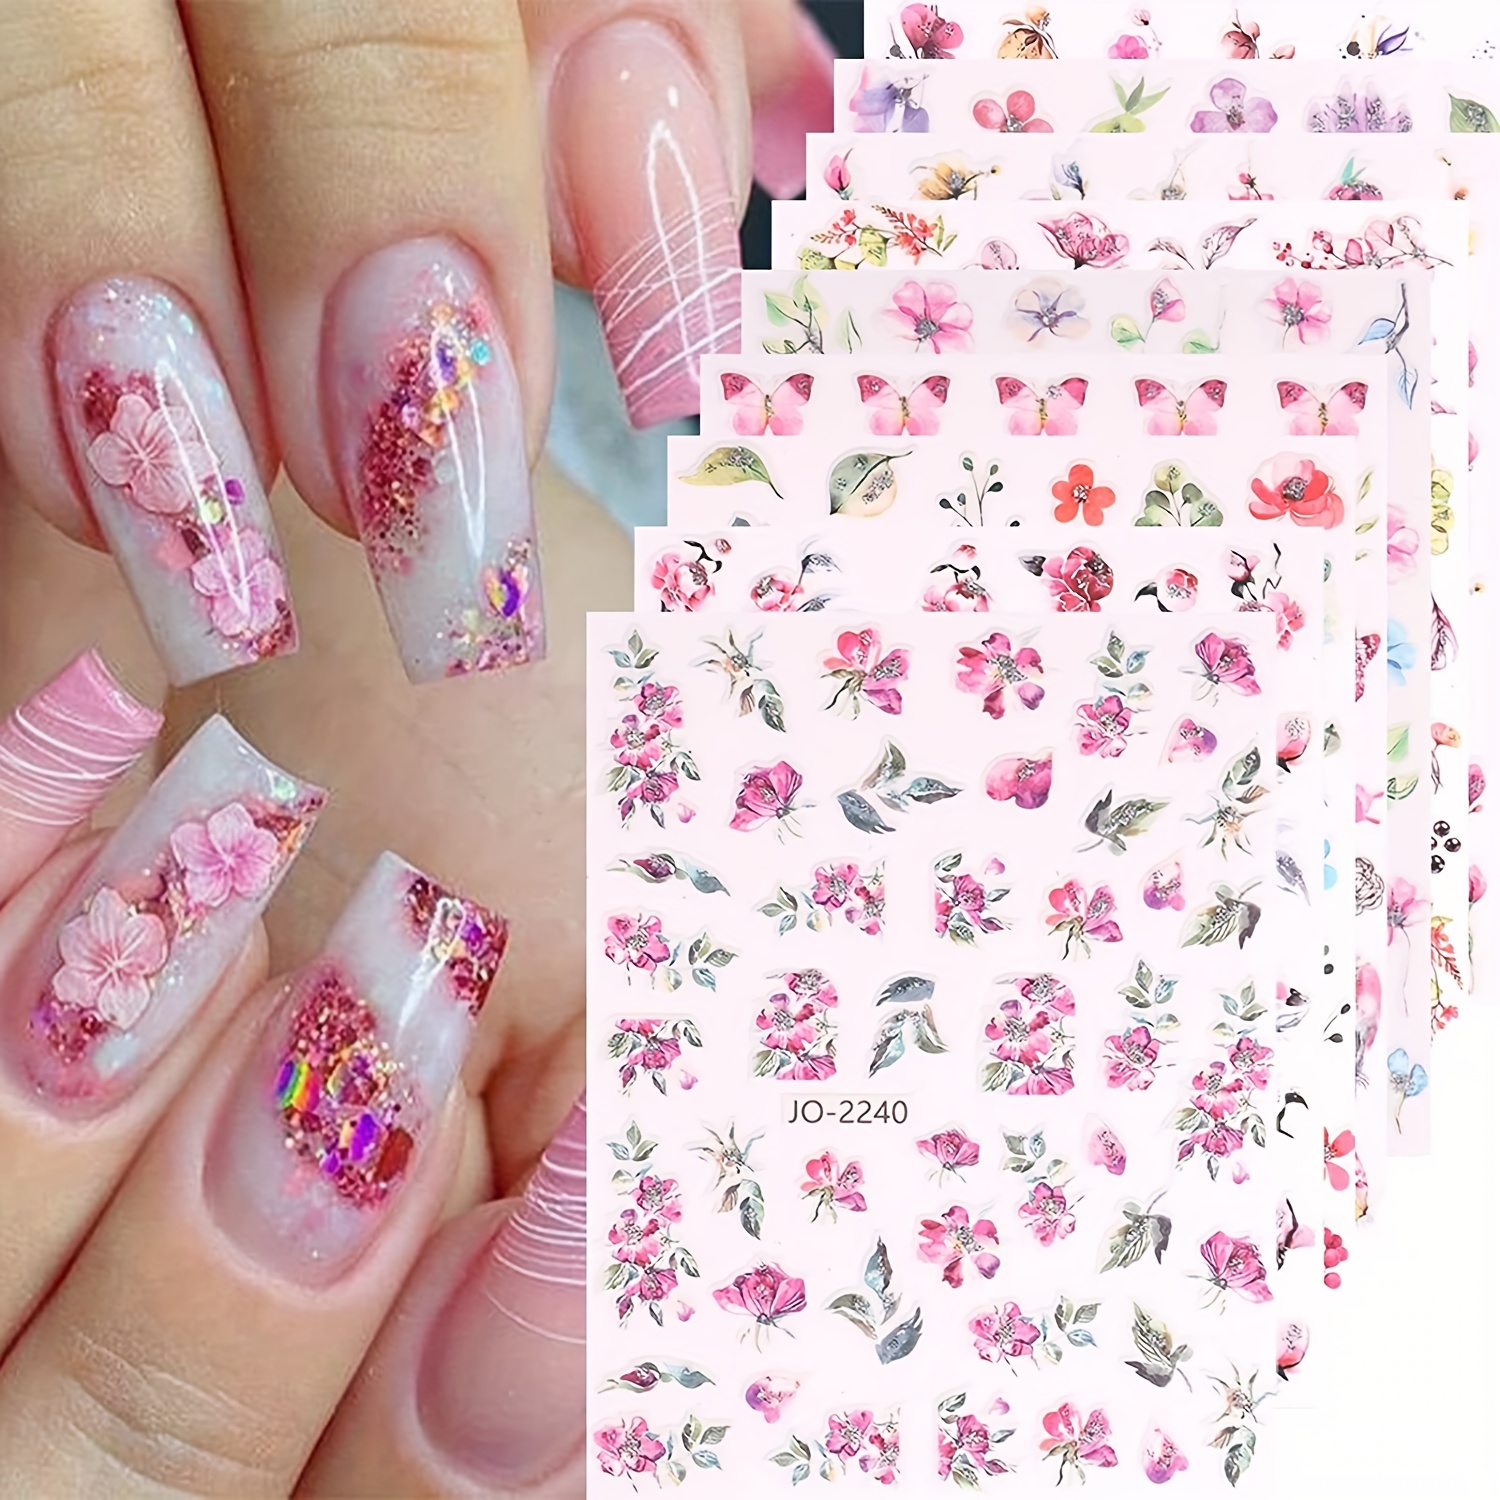 12 Gorgeous Birth Month Flower-Inspired Manicures | Makeup.com